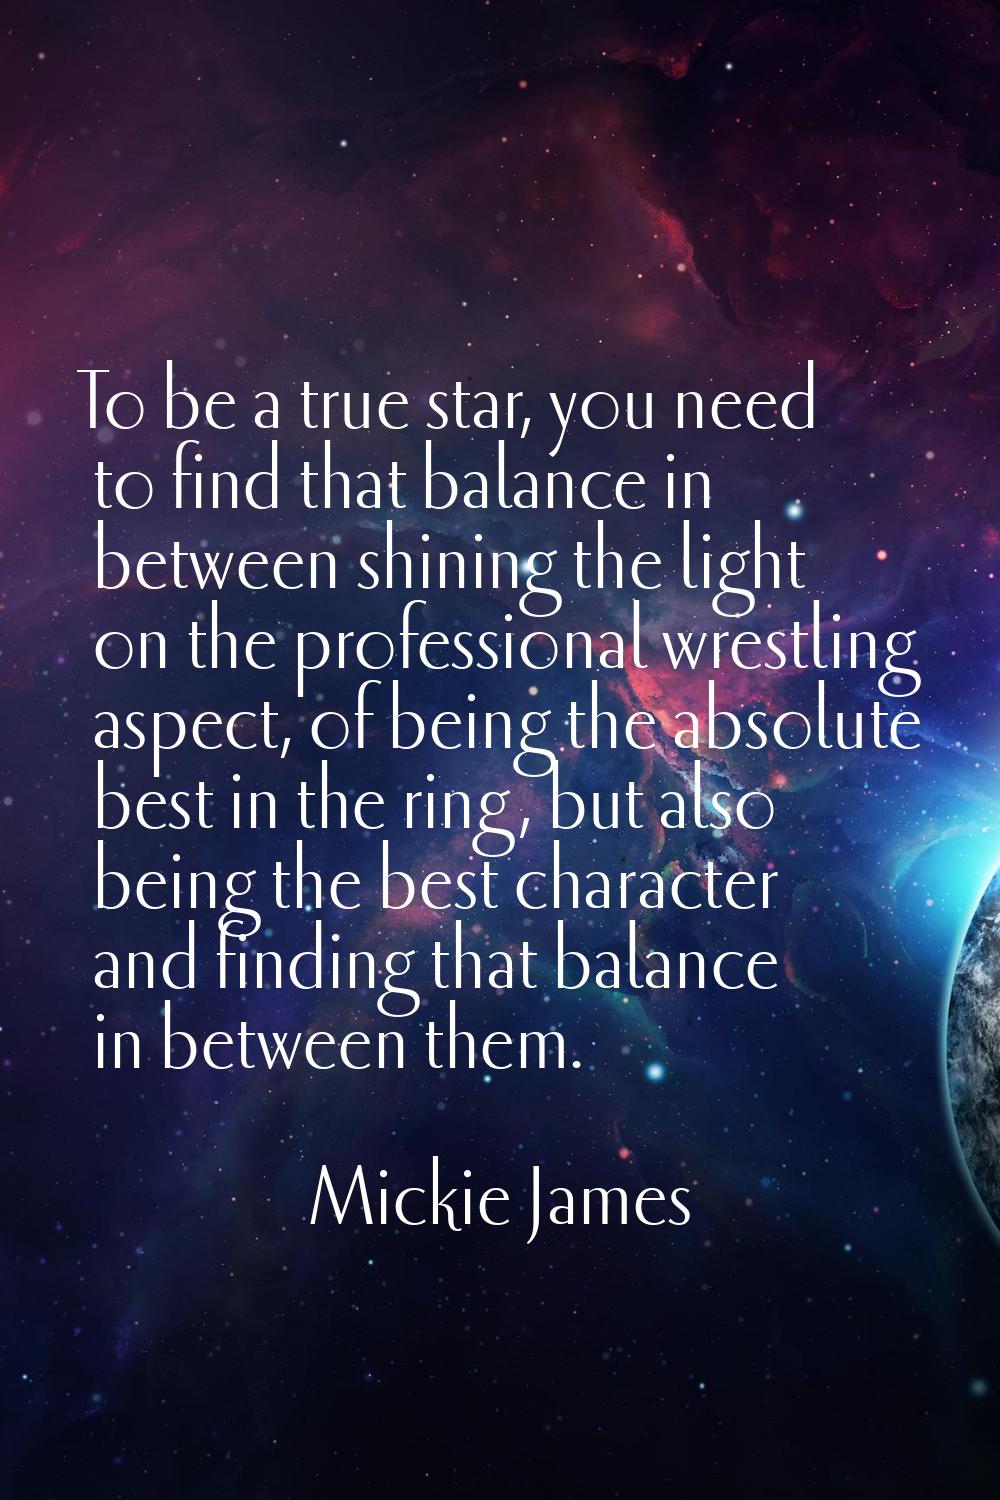 To be a true star, you need to find that balance in between shining the light on the professional w